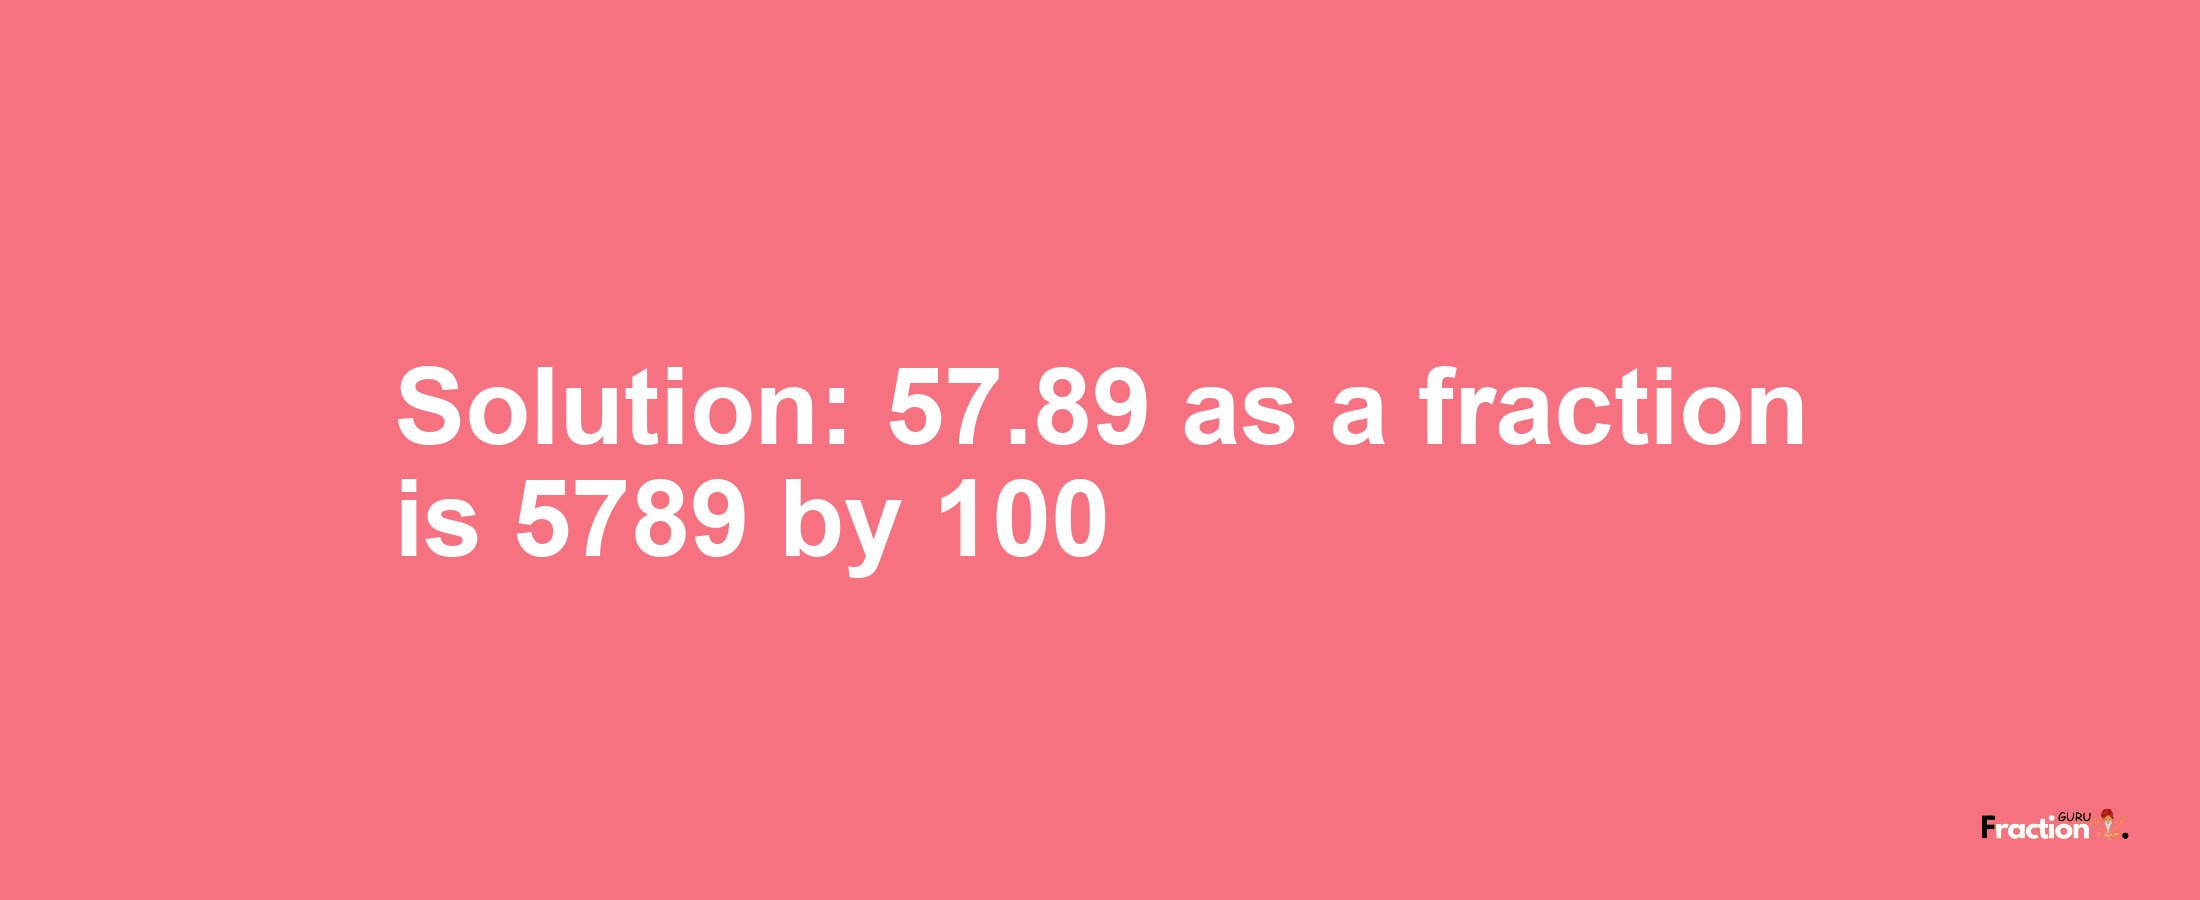 Solution:57.89 as a fraction is 5789/100